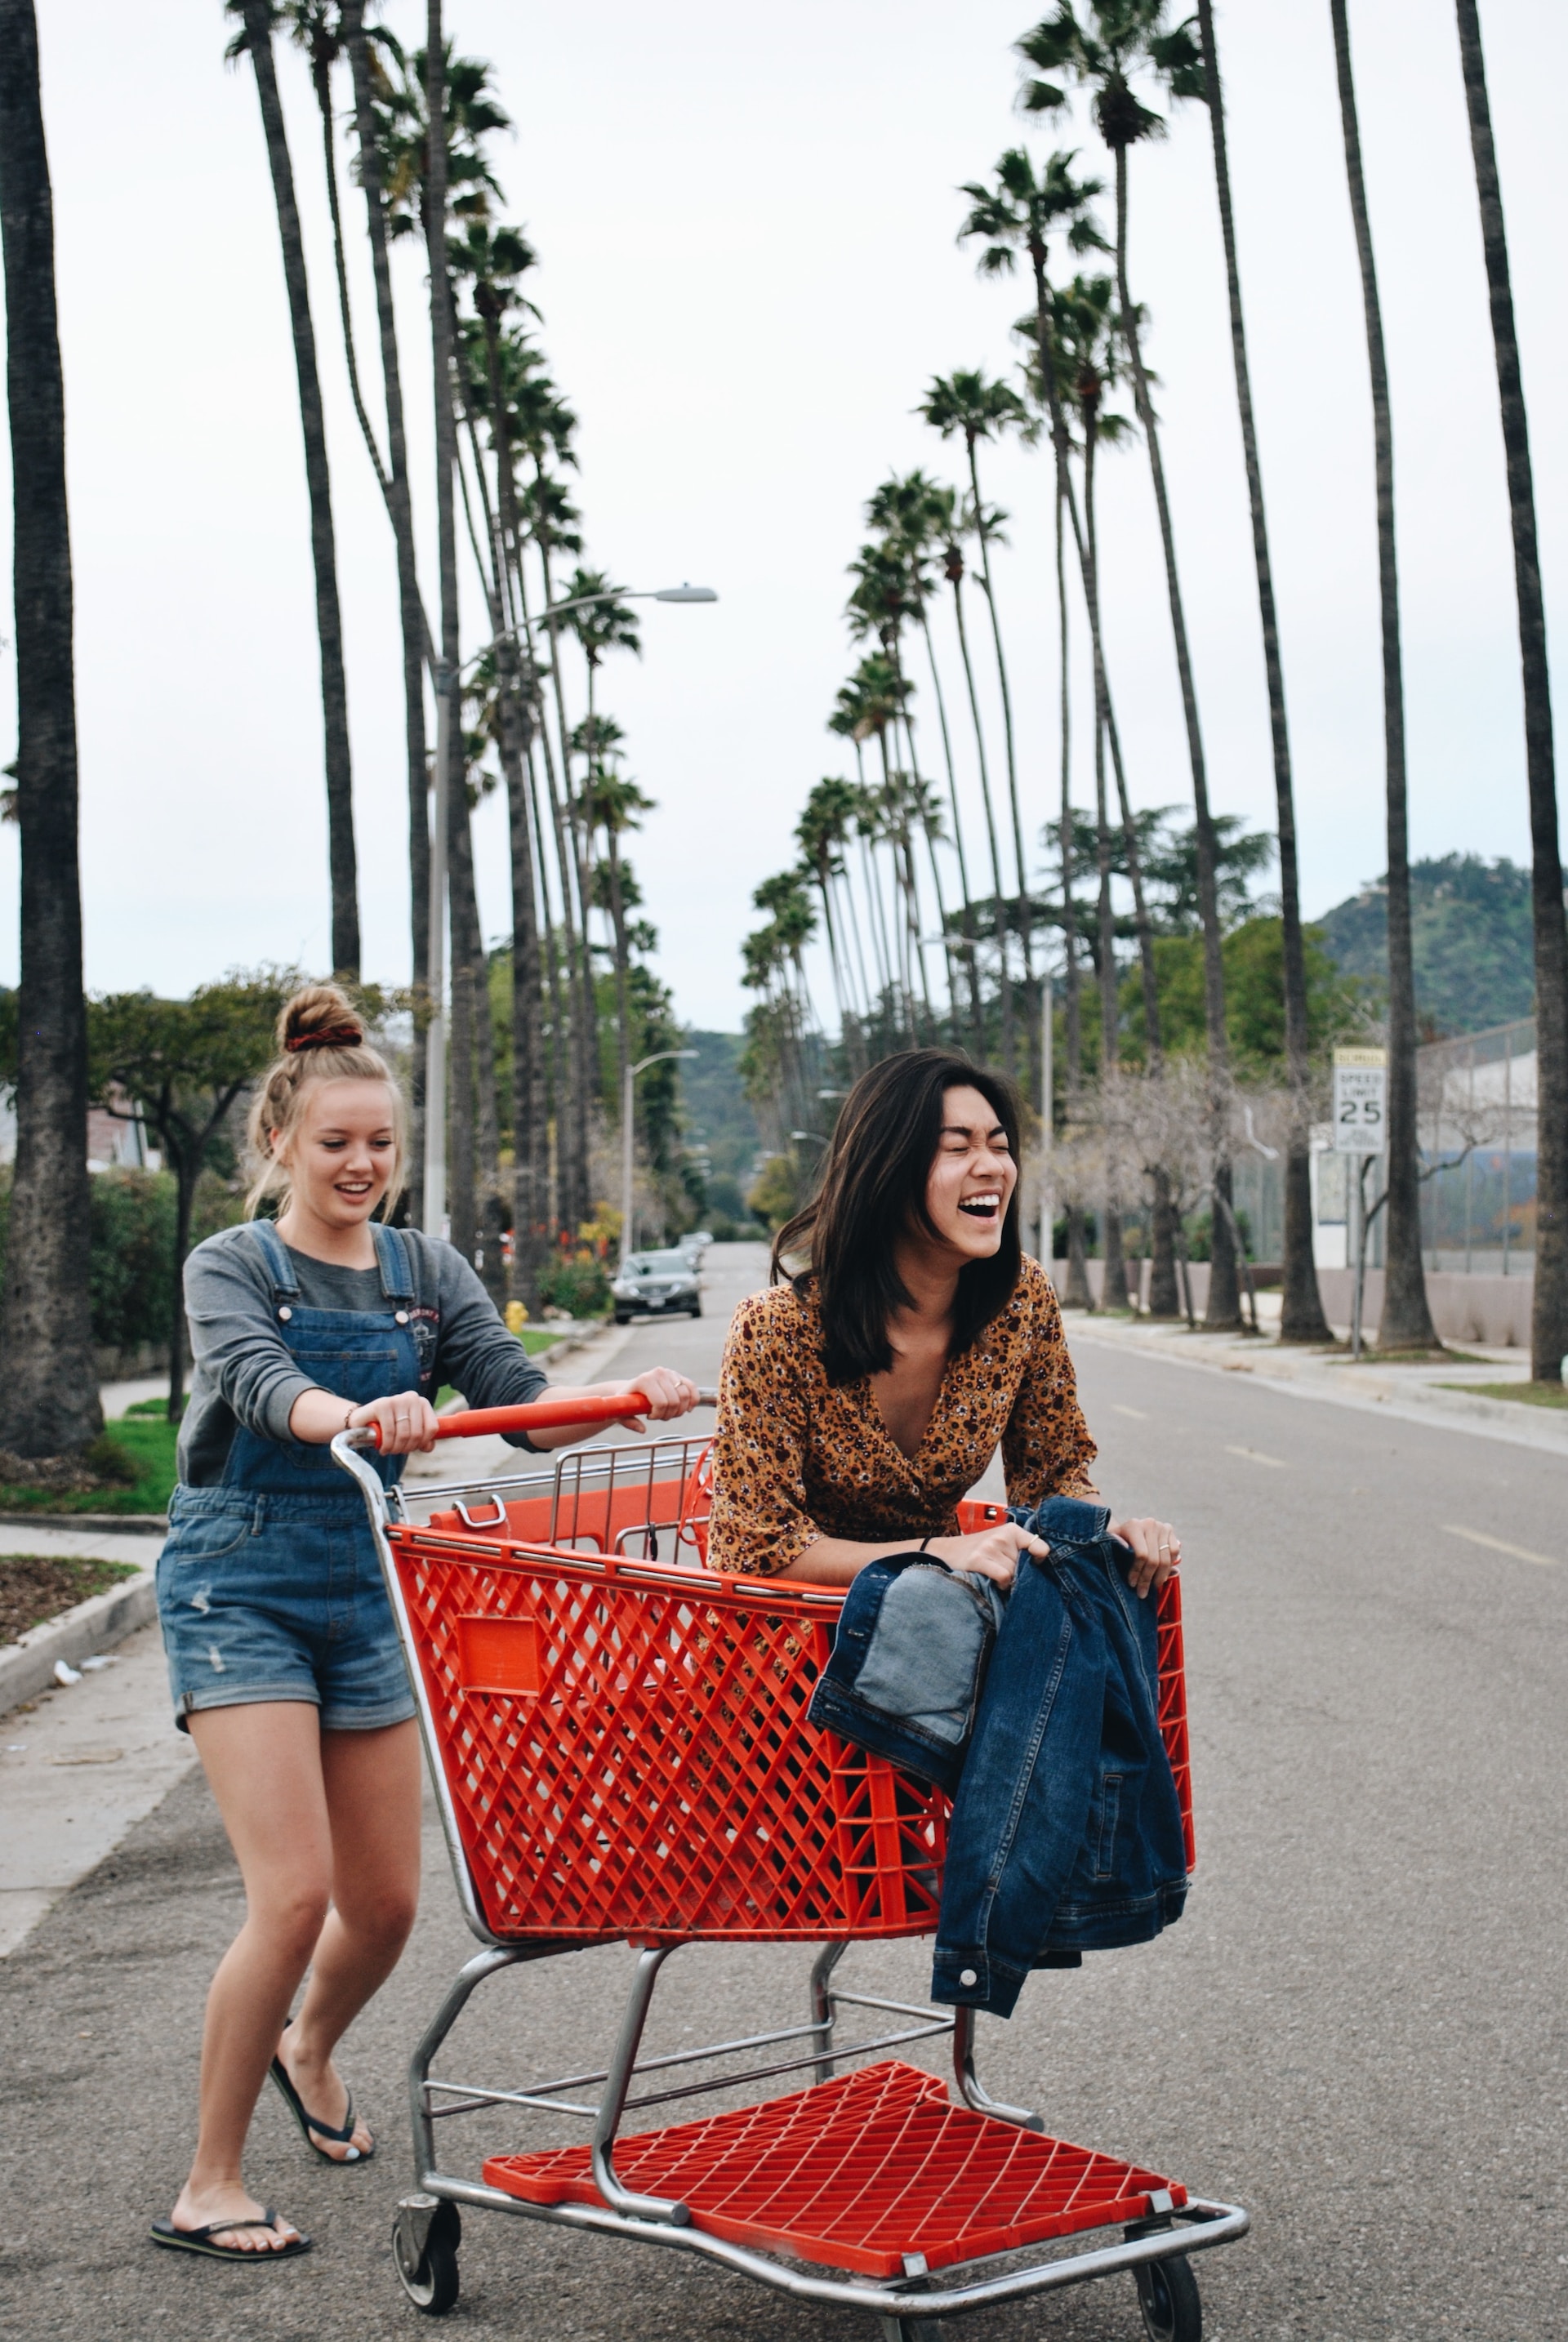 Girl pushing a shopping cart her friend is riding on.